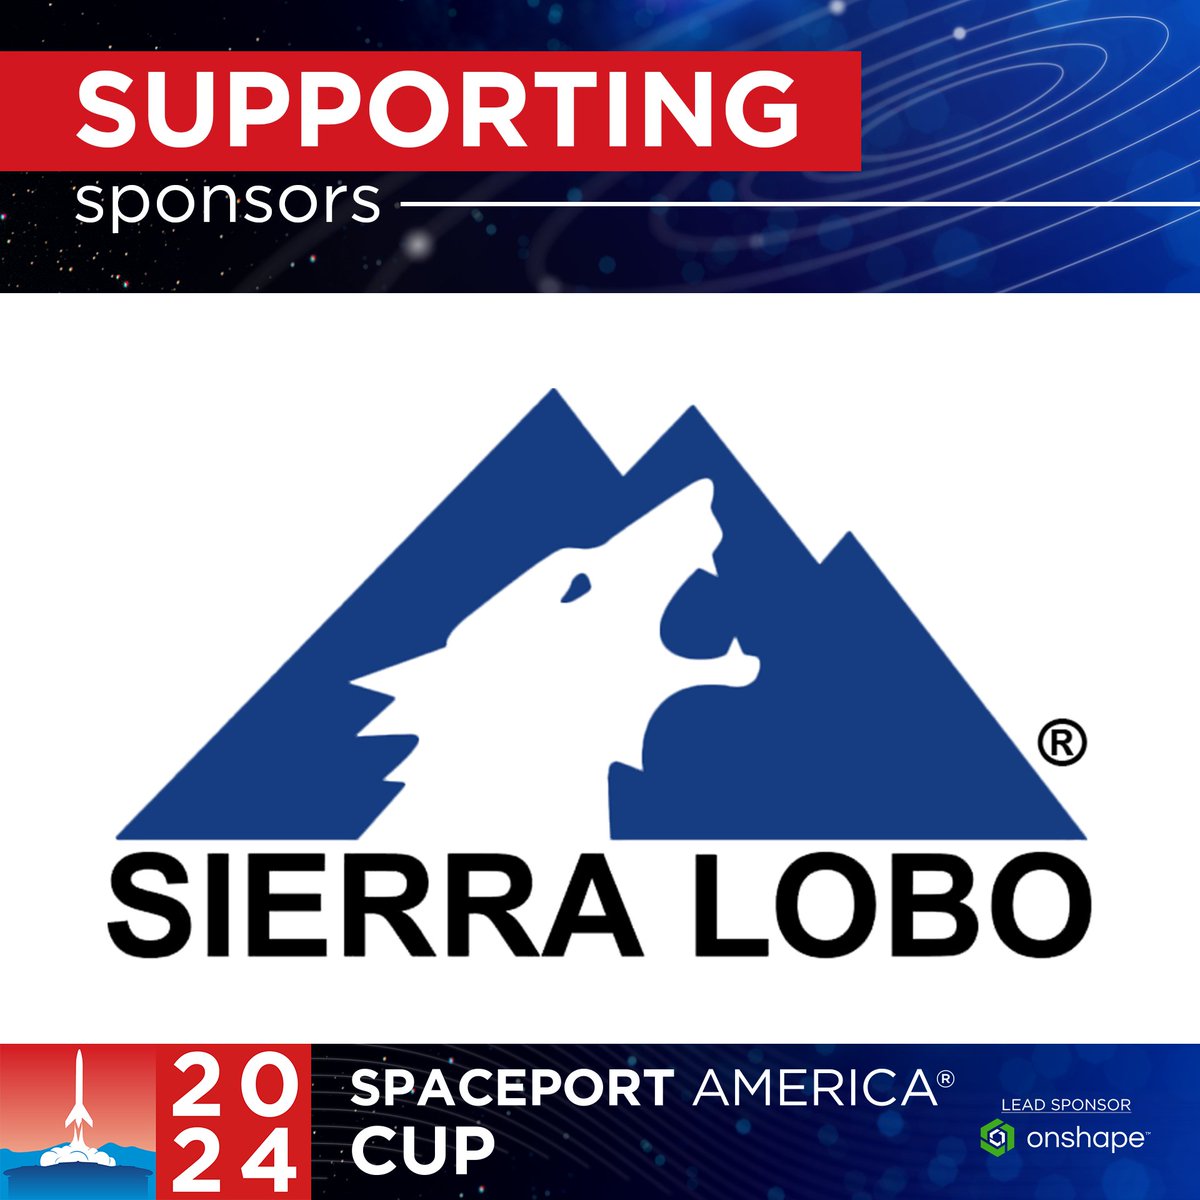 Whether it's testing, eval, research, technology or engineering services, Sierra Lobo does it at a high level 🚀 We're proud to have them on board as a supporter of the 2024 Spaceport America Cup ✨ Learn more | bit.ly/3PPXe08